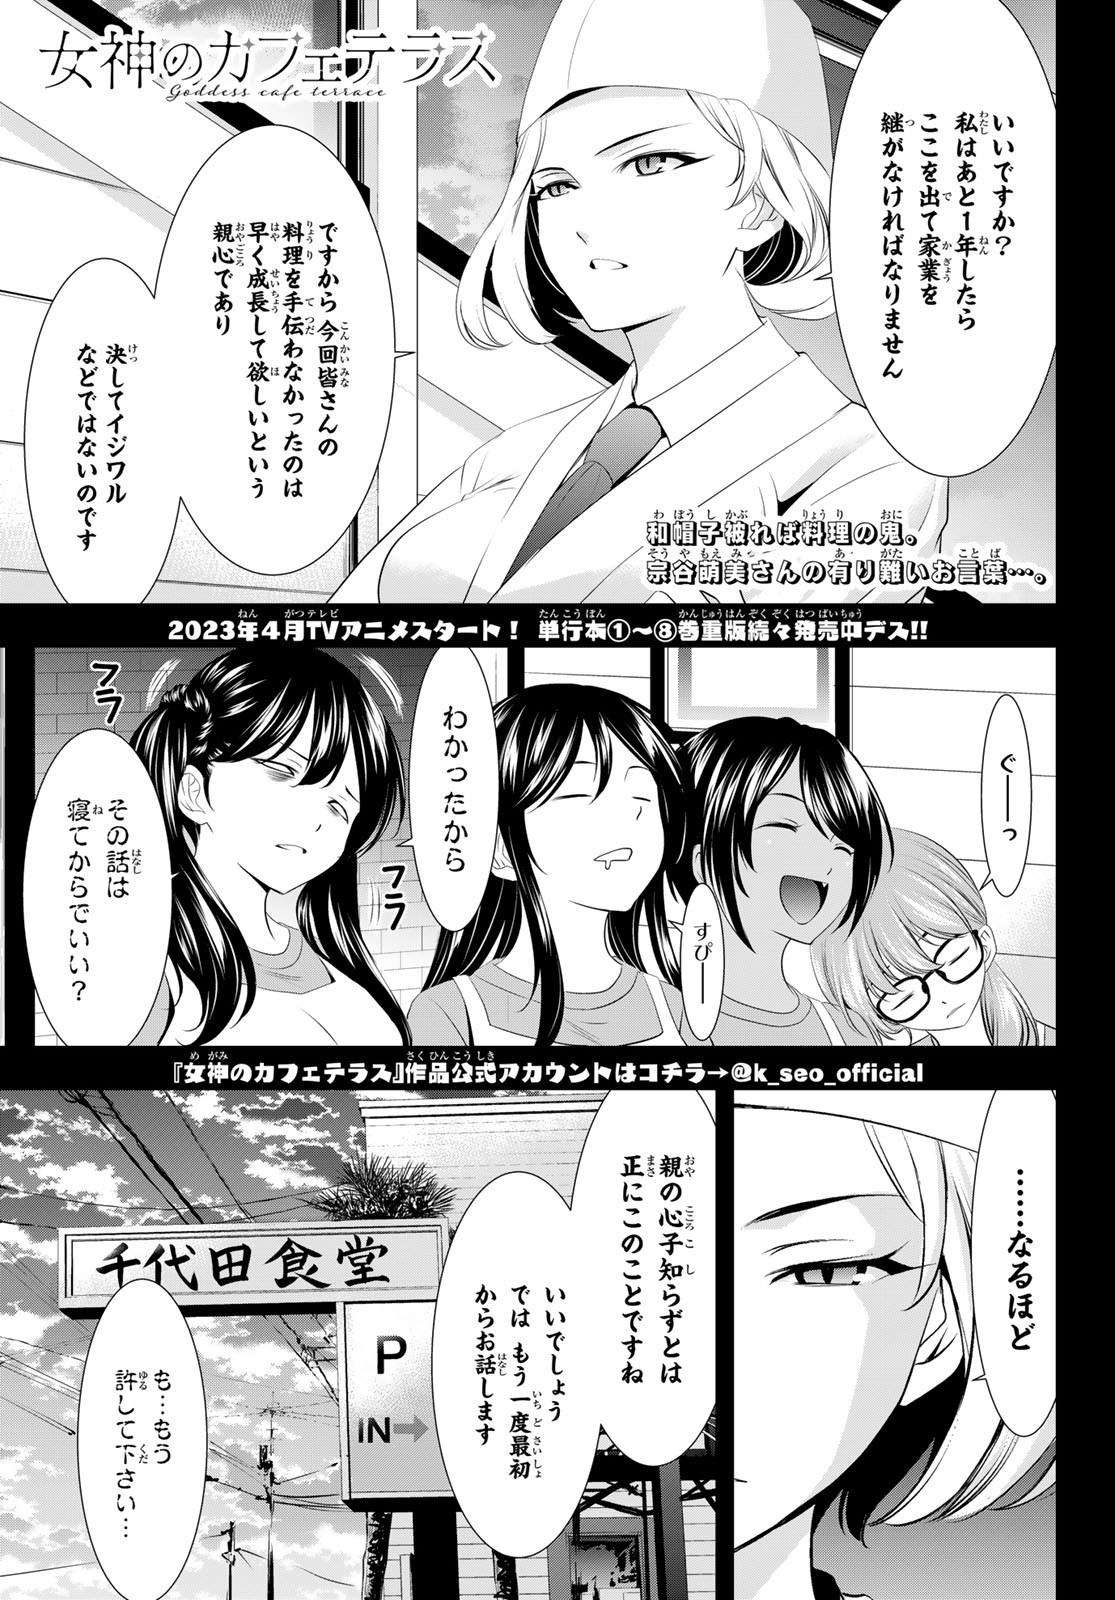 Goddess-Cafe-Terrace - Chapter 085 - Page 1